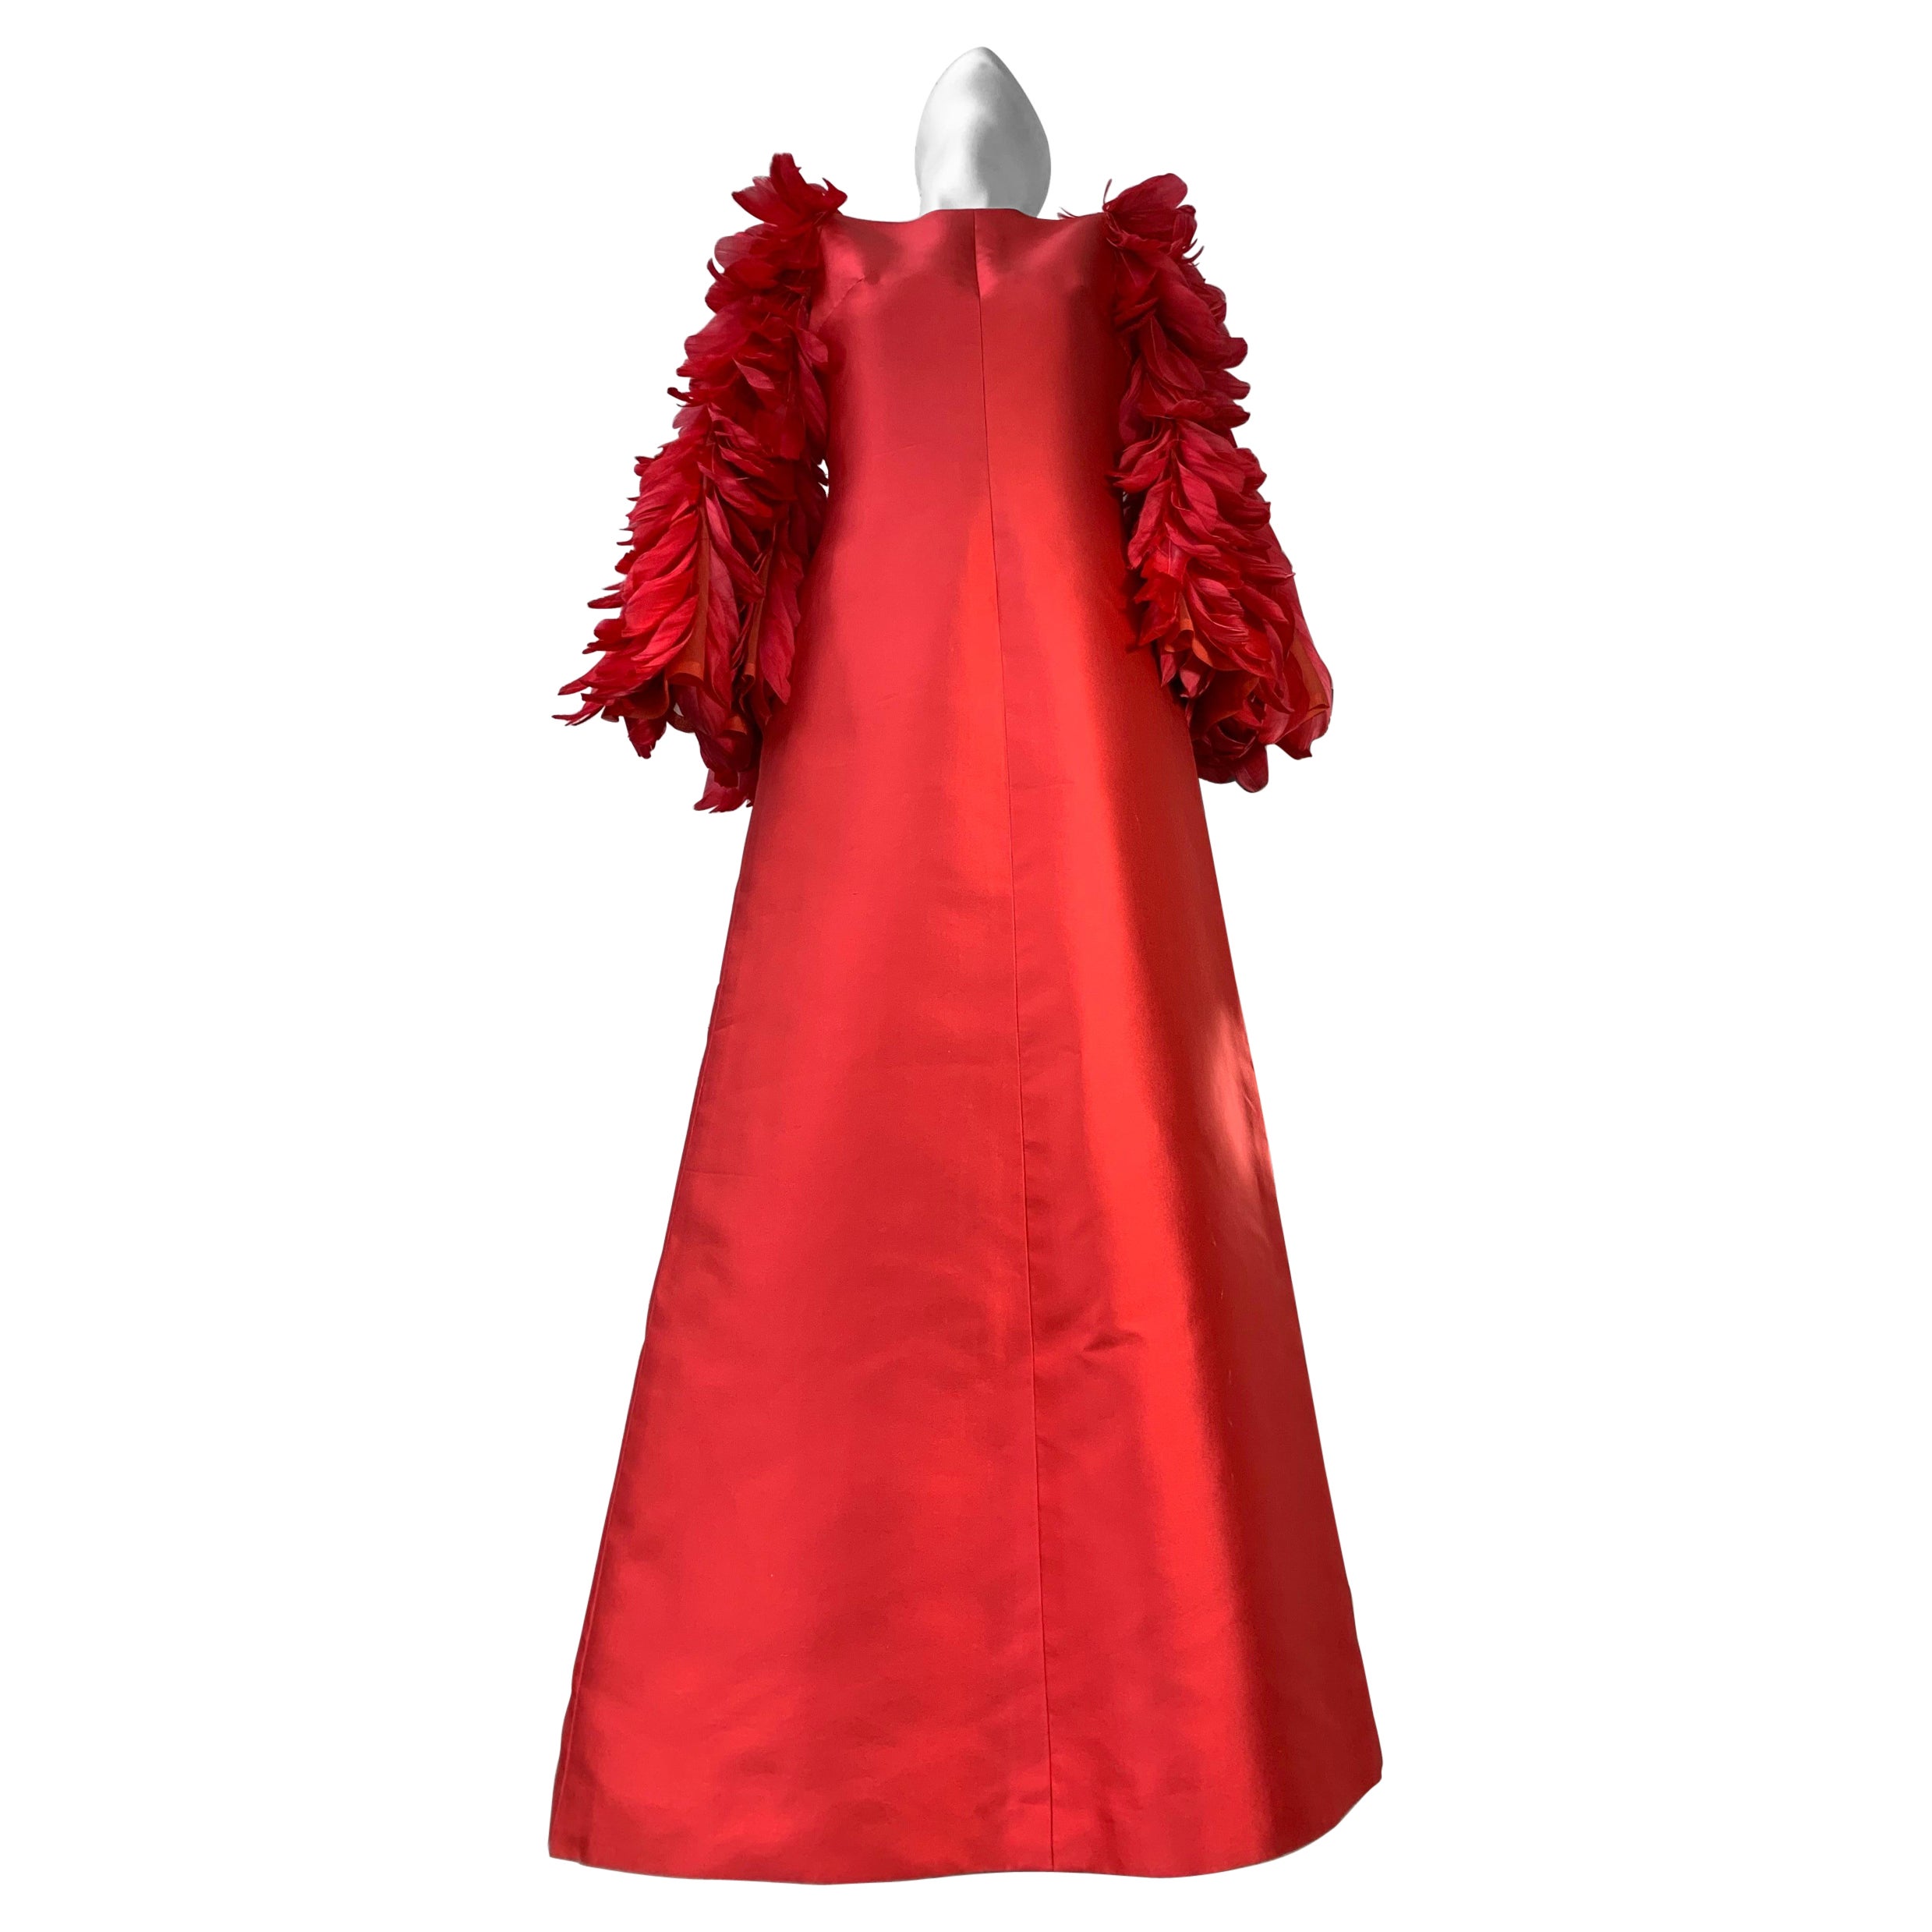 1960 Joui Schiesser Haute Couture Red Silk Gazar Gown w Feathered Bell Sleeves For Sale